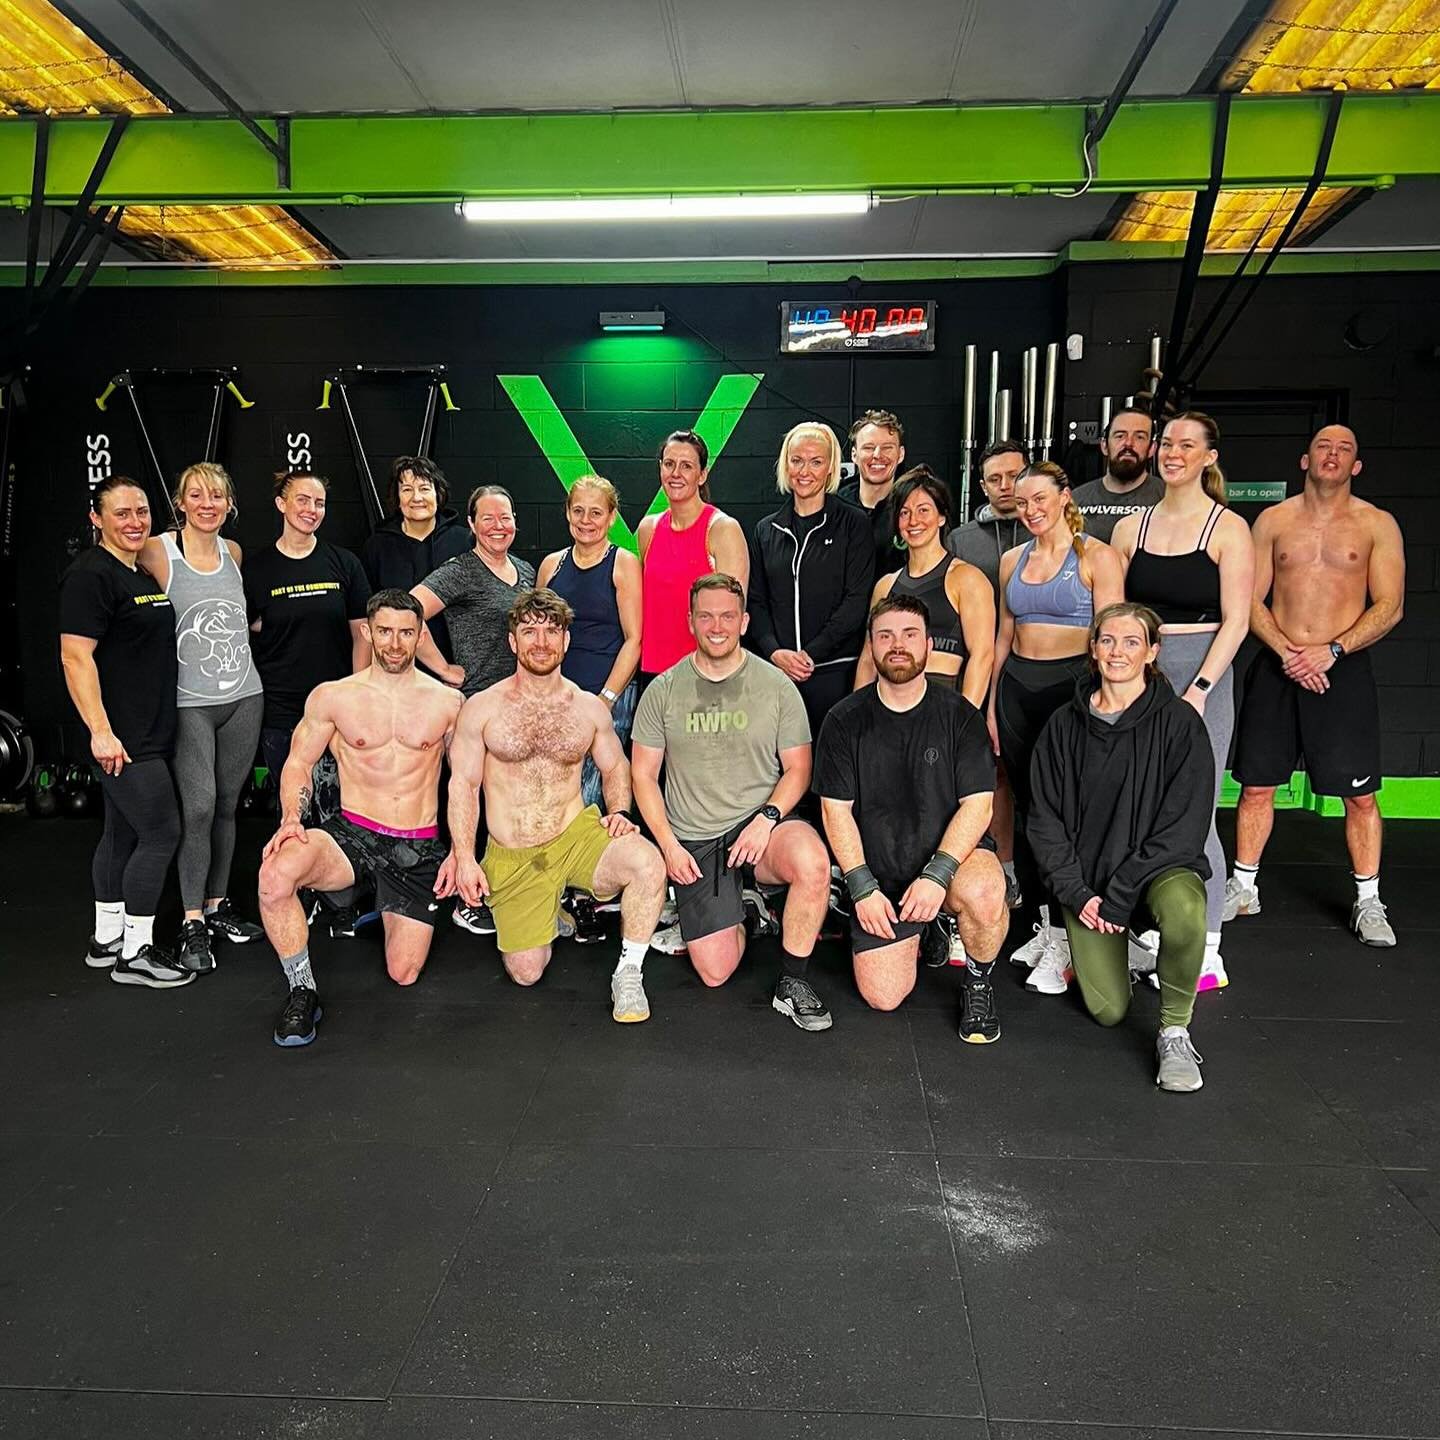 At Vorto Fitness, we&rsquo;re all about our community. We decided what better way to enhance the spirit at Vorto by introducing a new class&hellip; The ALL IN - Partner WOD! 🔥

Based on our recent member feedback, we are now trialling changes to our